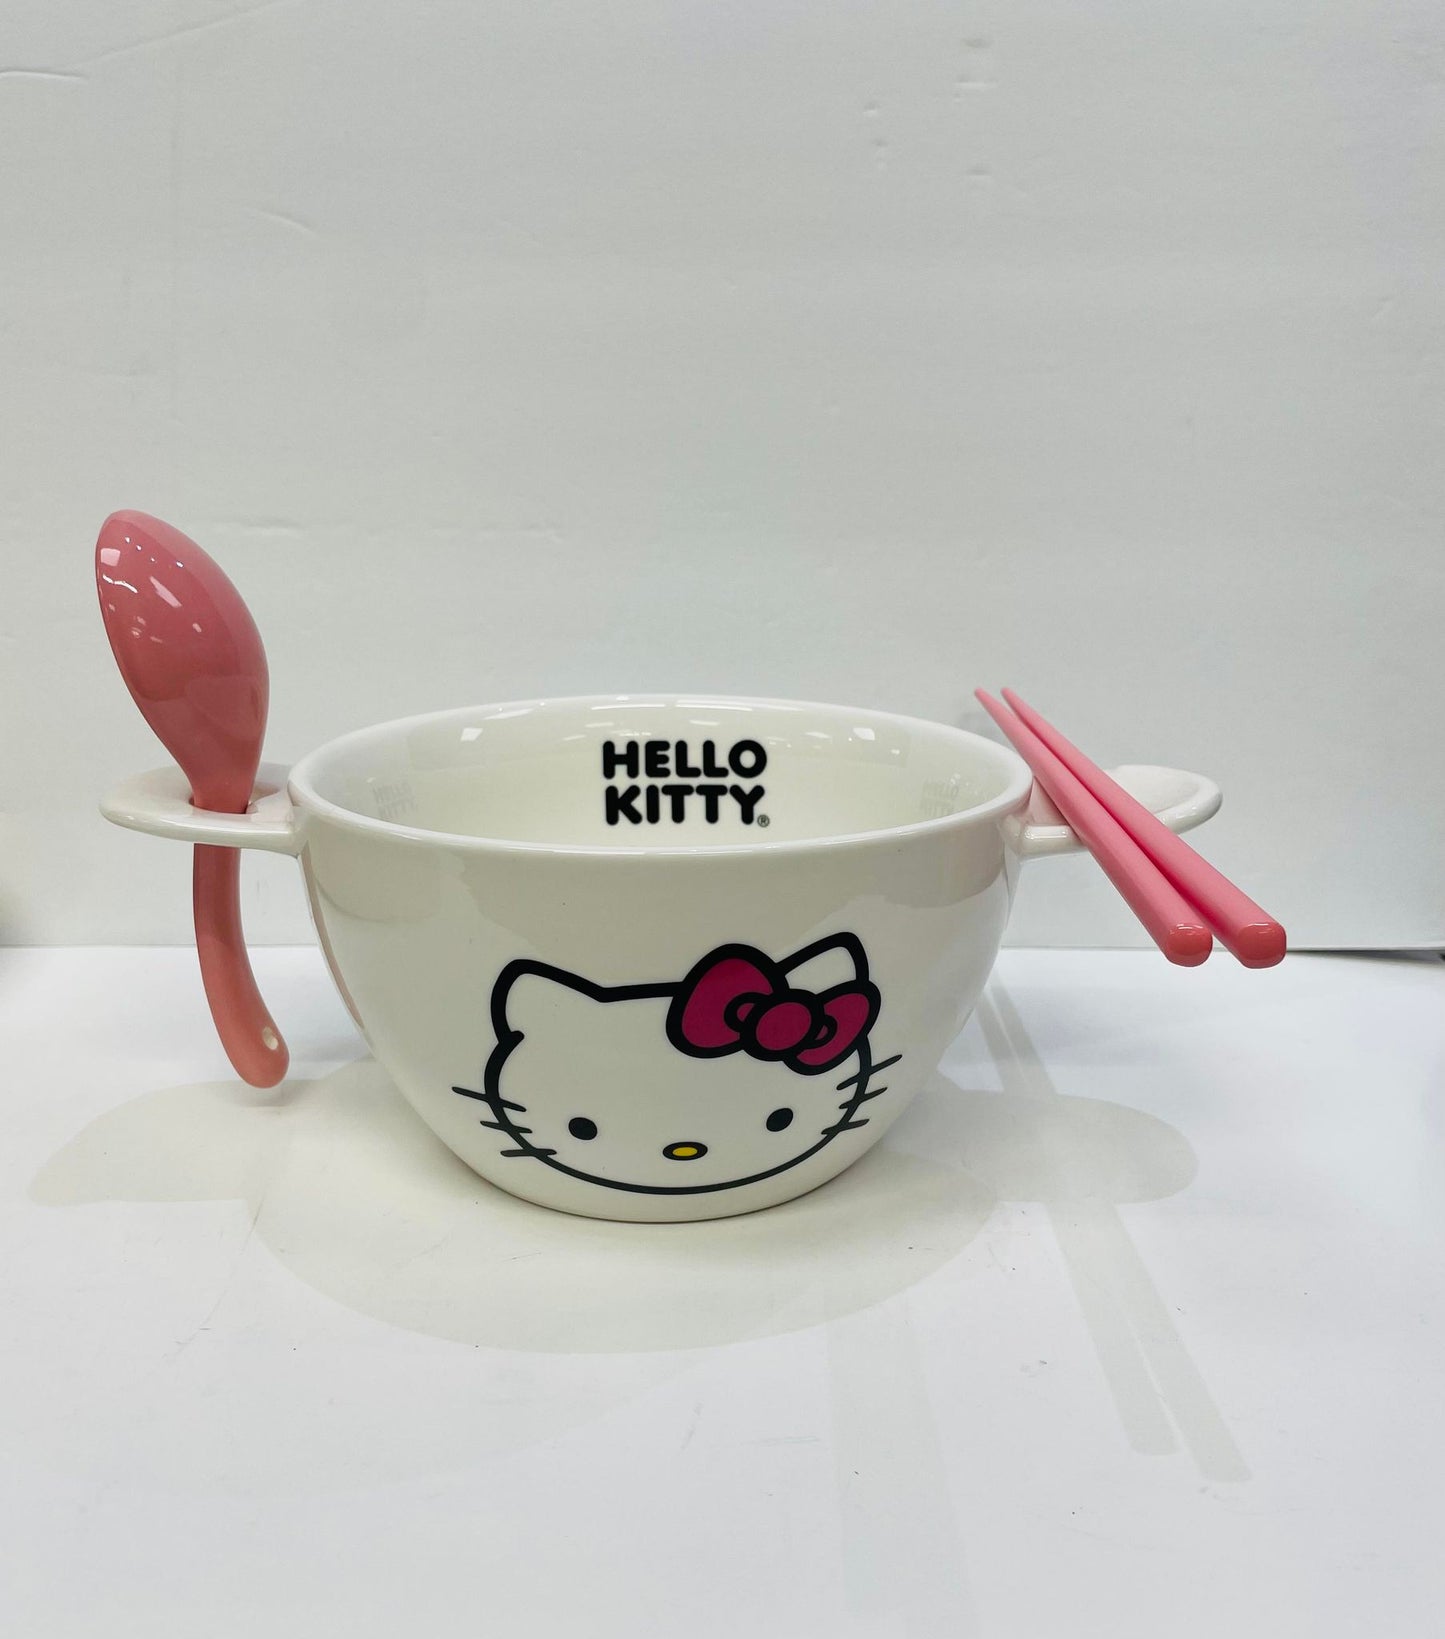 HELLO KITTY RAMEN BOWL WITH CHOPSTICK AND SPOON